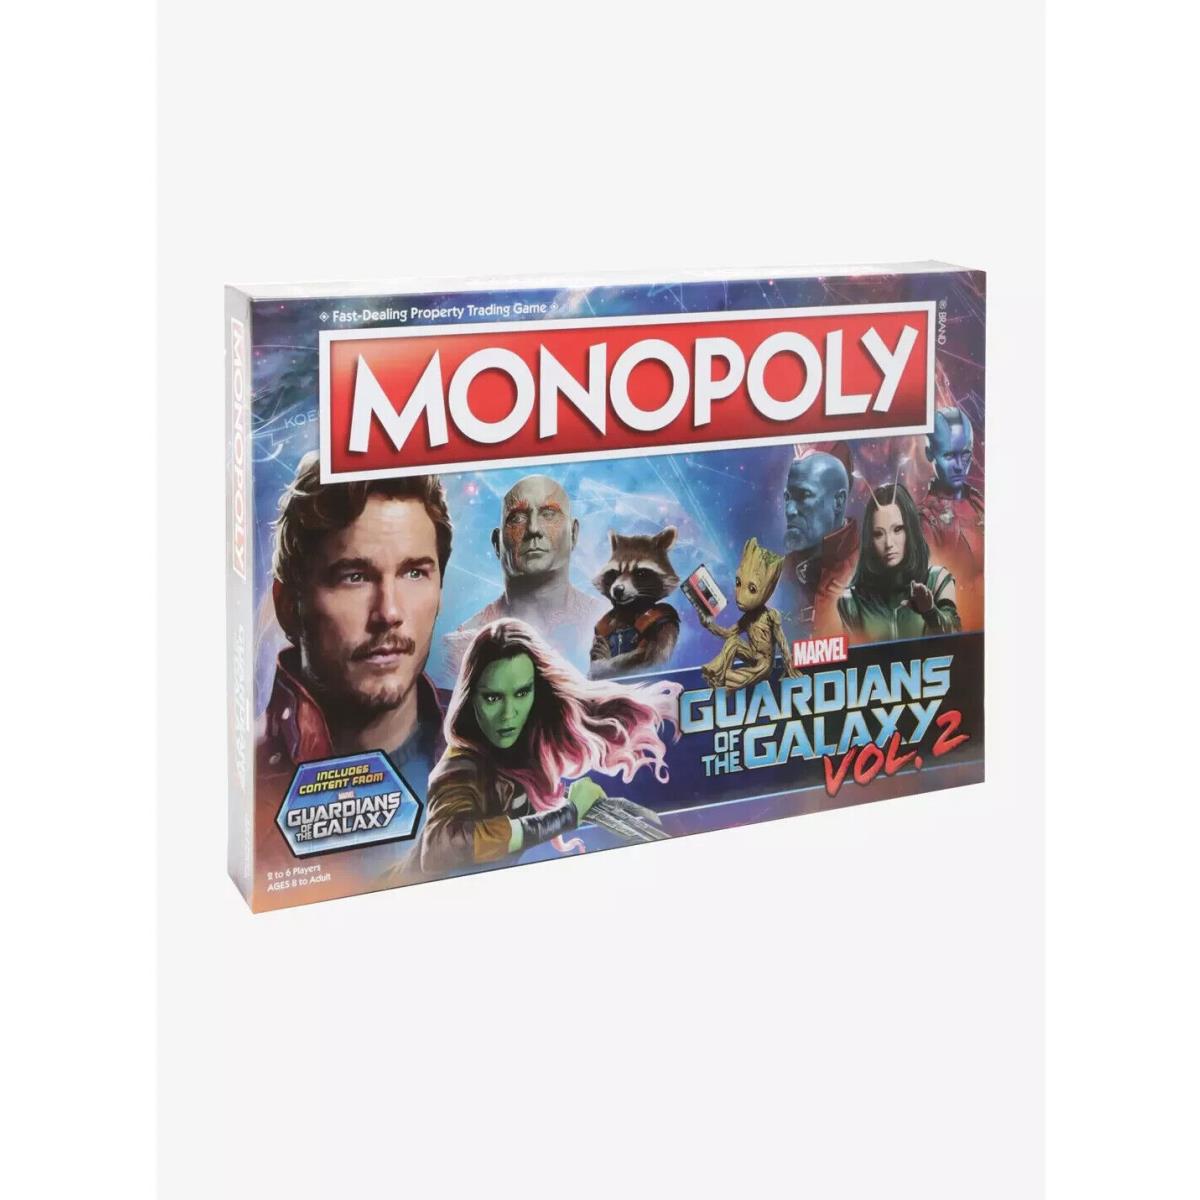 Monopoly Guardians of The Galaxy Vol. 2